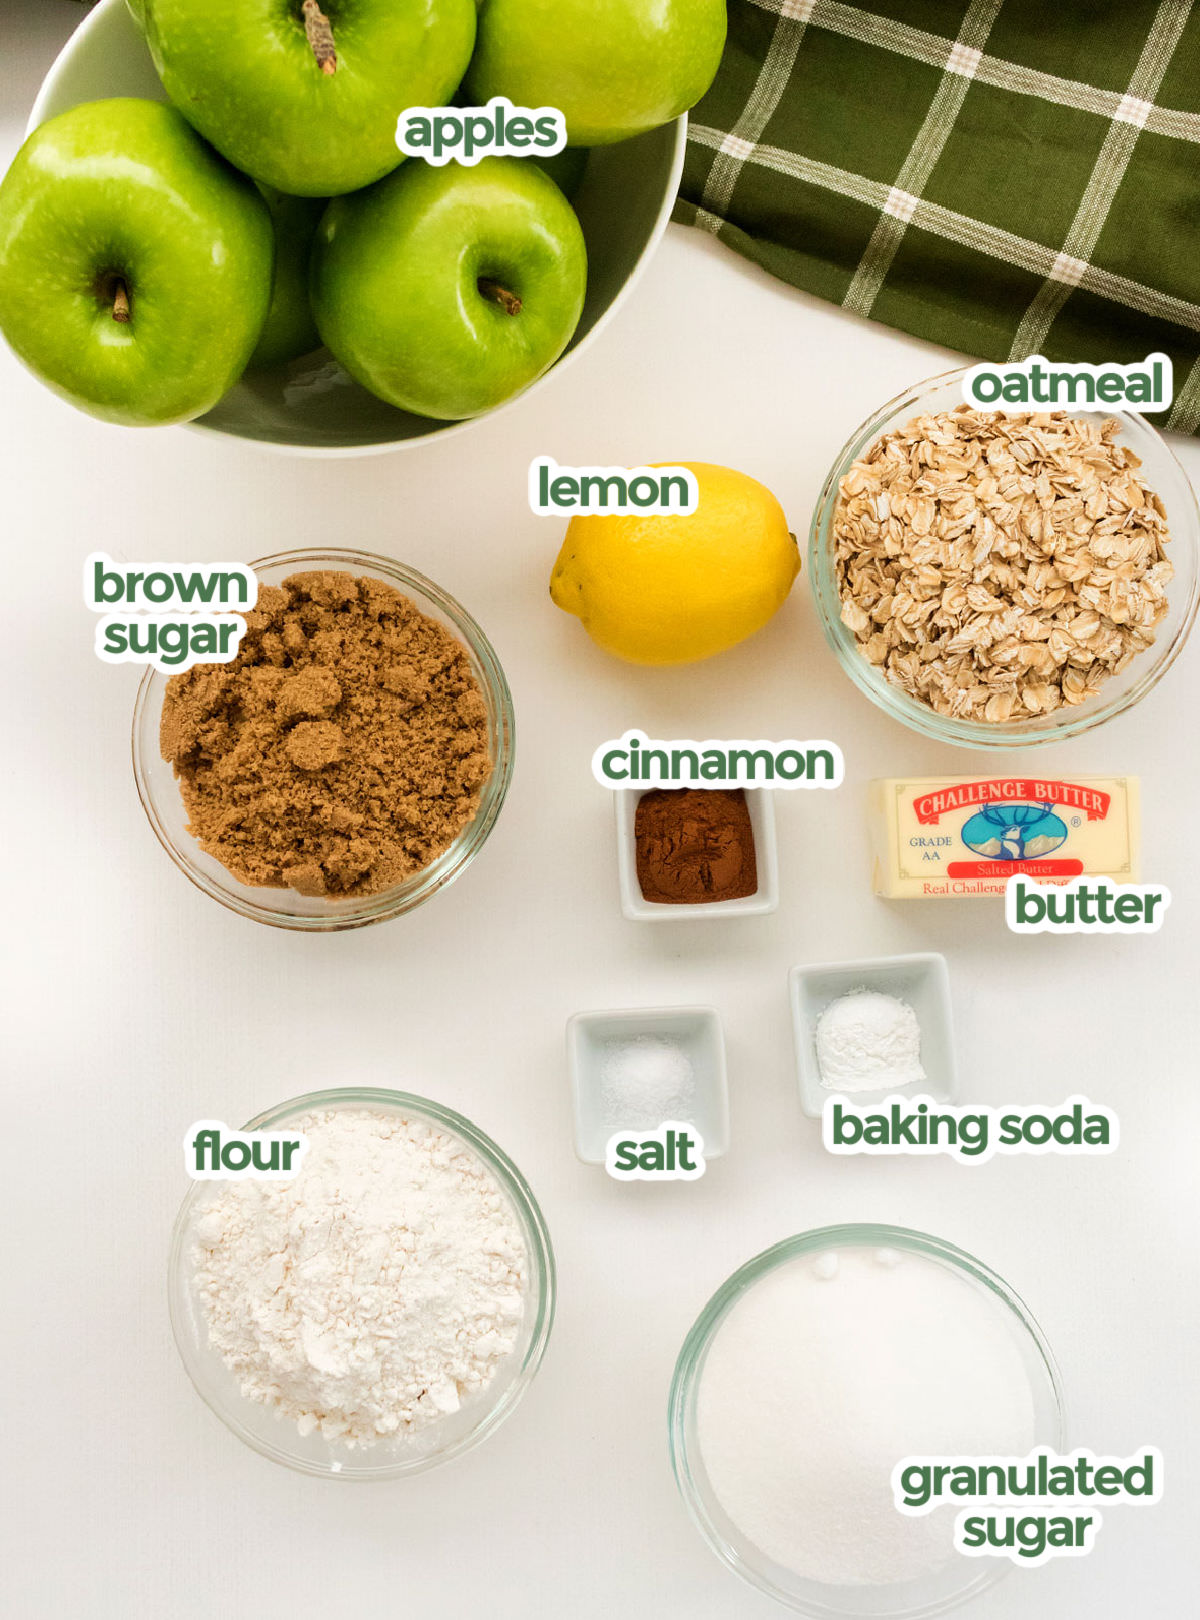 All the ingredients you will need to make Apple Crisp including apples, oatmeal, lemon, brown sugar, cinnamon, butter, baking soda, salt, flour and granulated sugar.